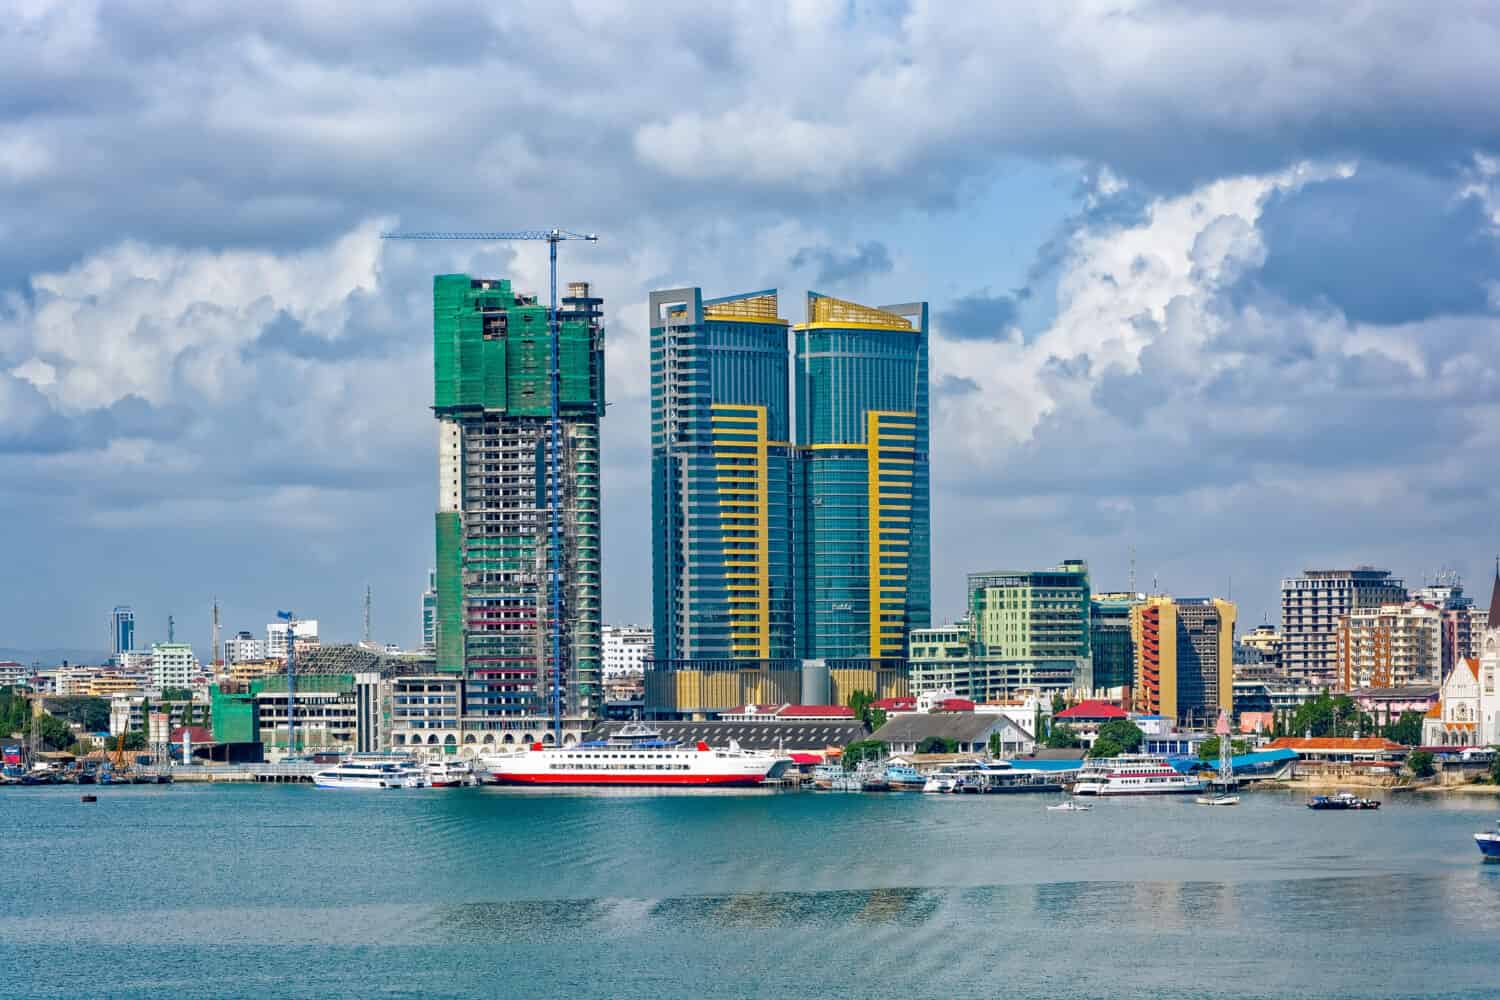 Panorama of Dar Es Salaam City Centre with waterfront and ships